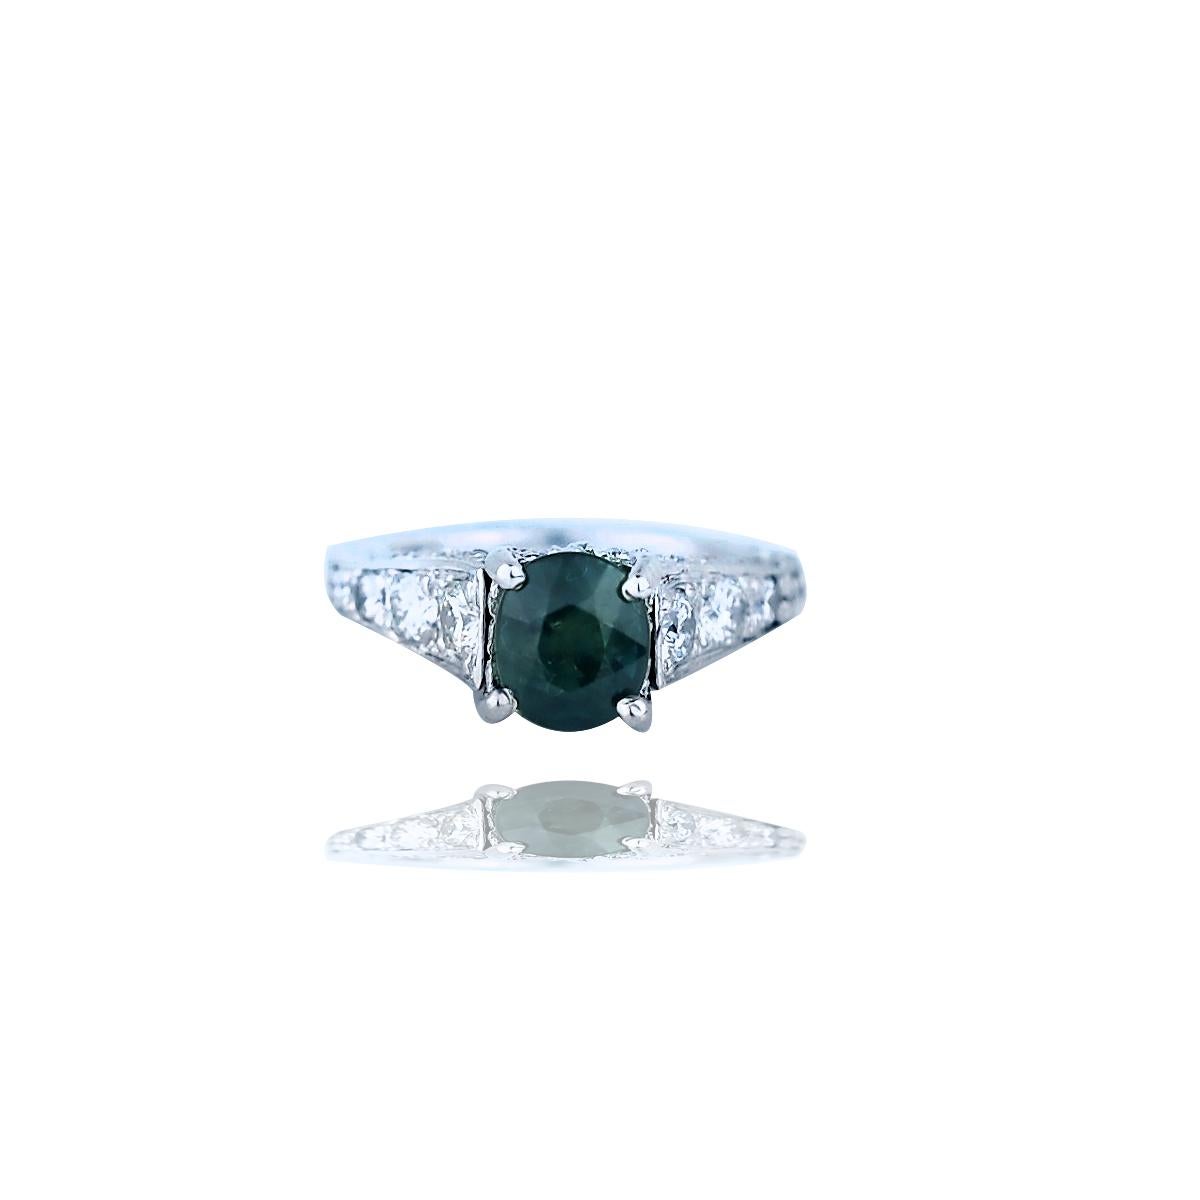 Contemporary Green Sapphire and Diamond Solitaire Ring Platinum 3.54 Carat Total